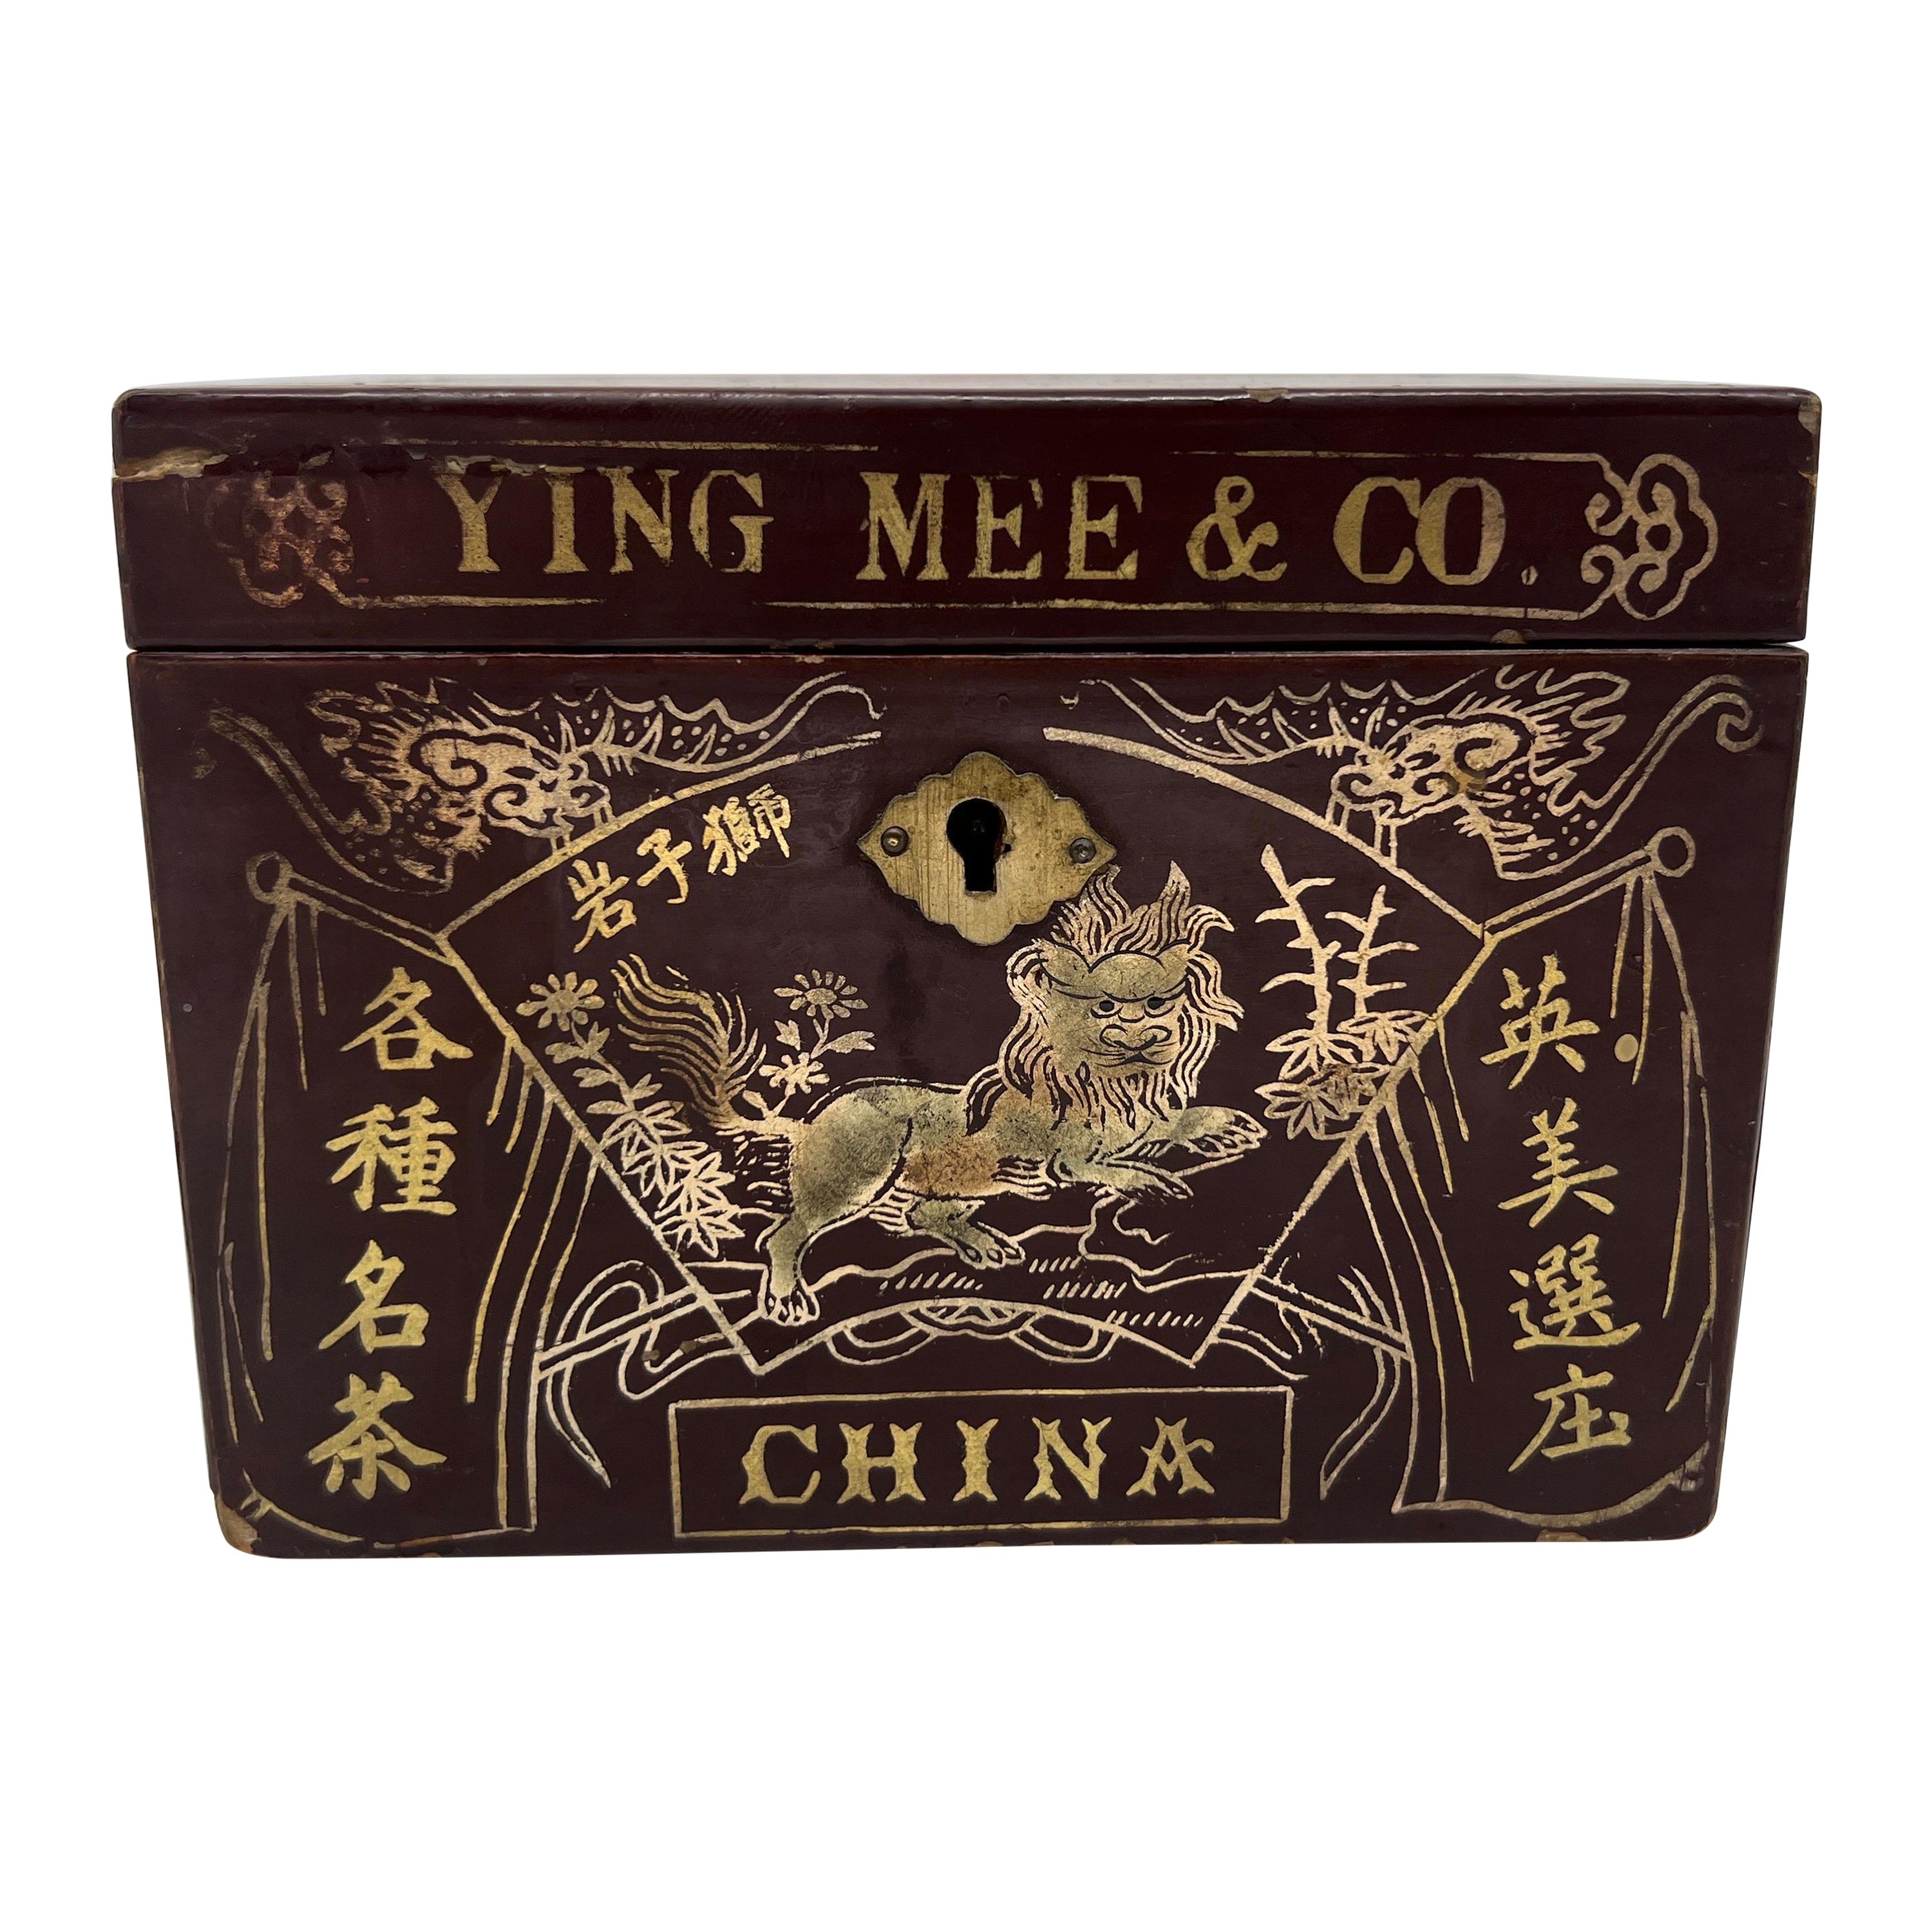 Ying Mee & Co., Antique Chinese Lacquer Tea Caddy or Box For Sale